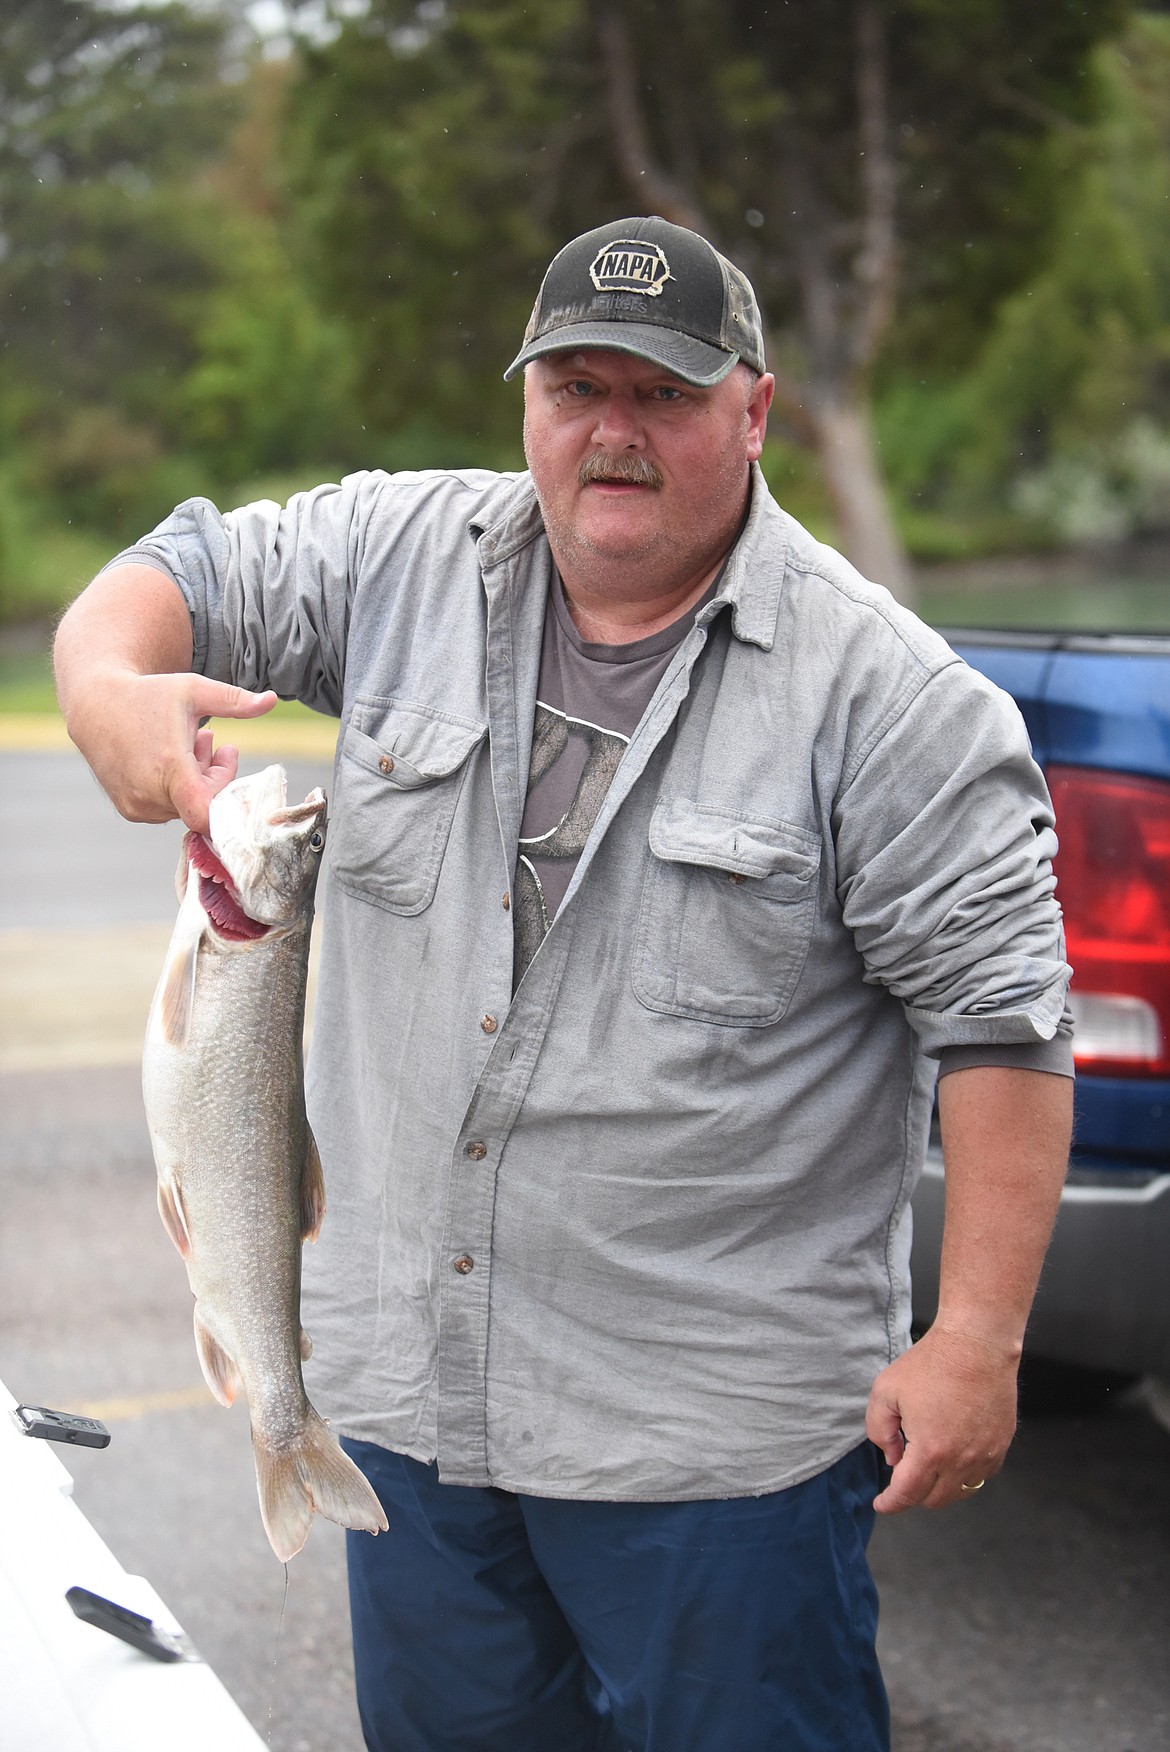 KALISPELL ANGLER Ron Seliger shows off one of the lake trout he caught Saturday in Flathead Lake during the Mack Days fishing tournament. (Scott Shindledecker/Daily Inter Lake)